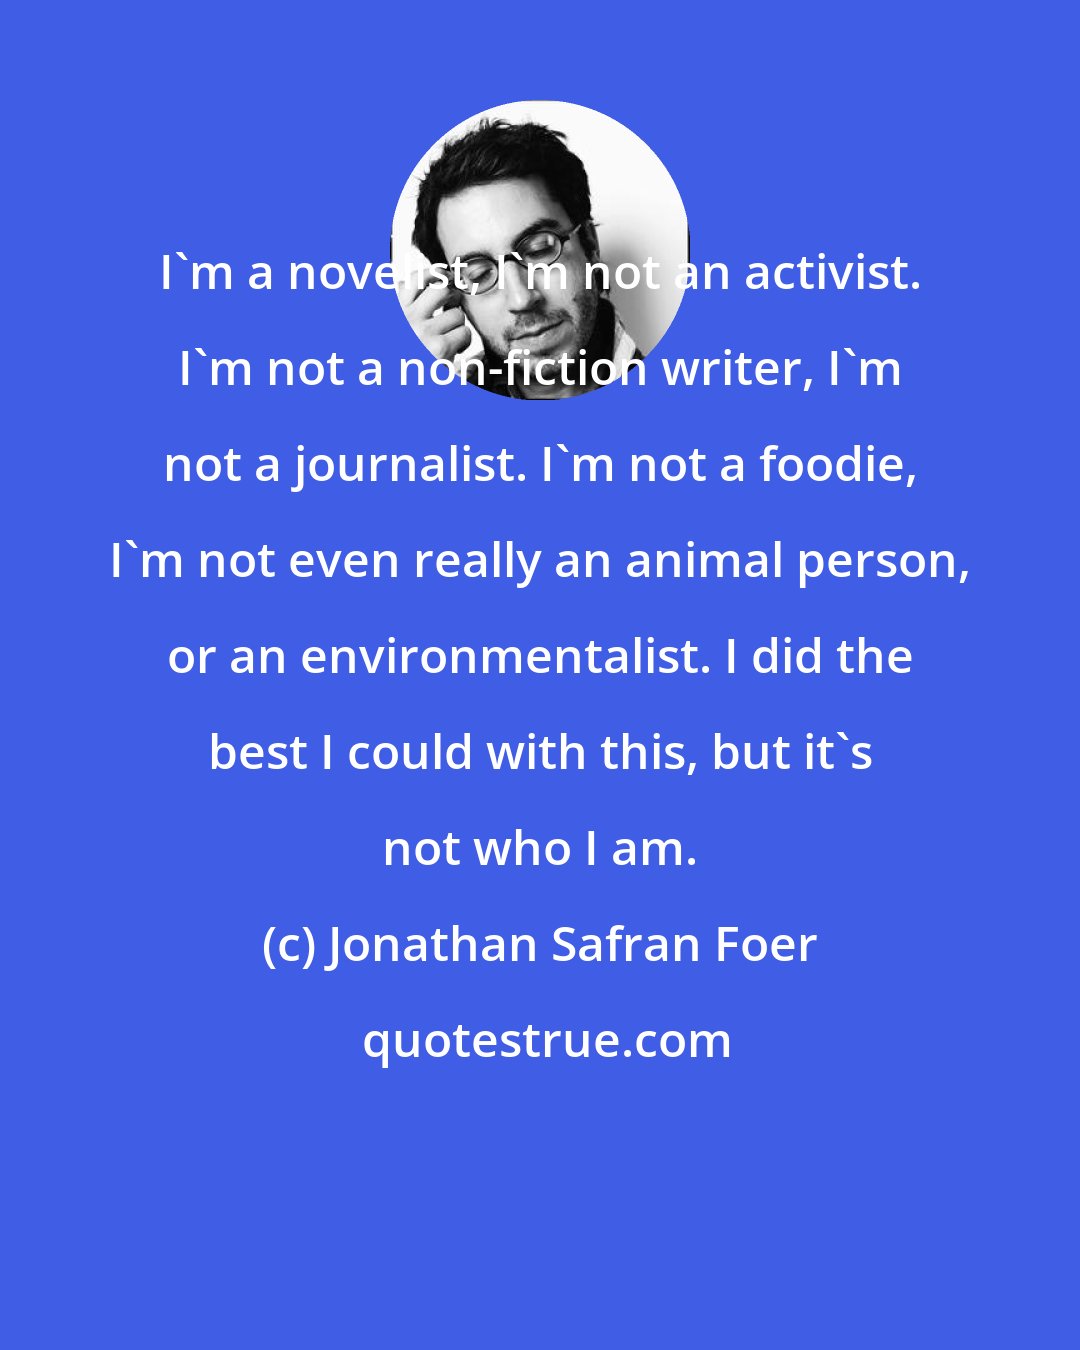 Jonathan Safran Foer: I'm a novelist, I'm not an activist. I'm not a non-fiction writer, I'm not a journalist. I'm not a foodie, I'm not even really an animal person, or an environmentalist. I did the best I could with this, but it's not who I am.